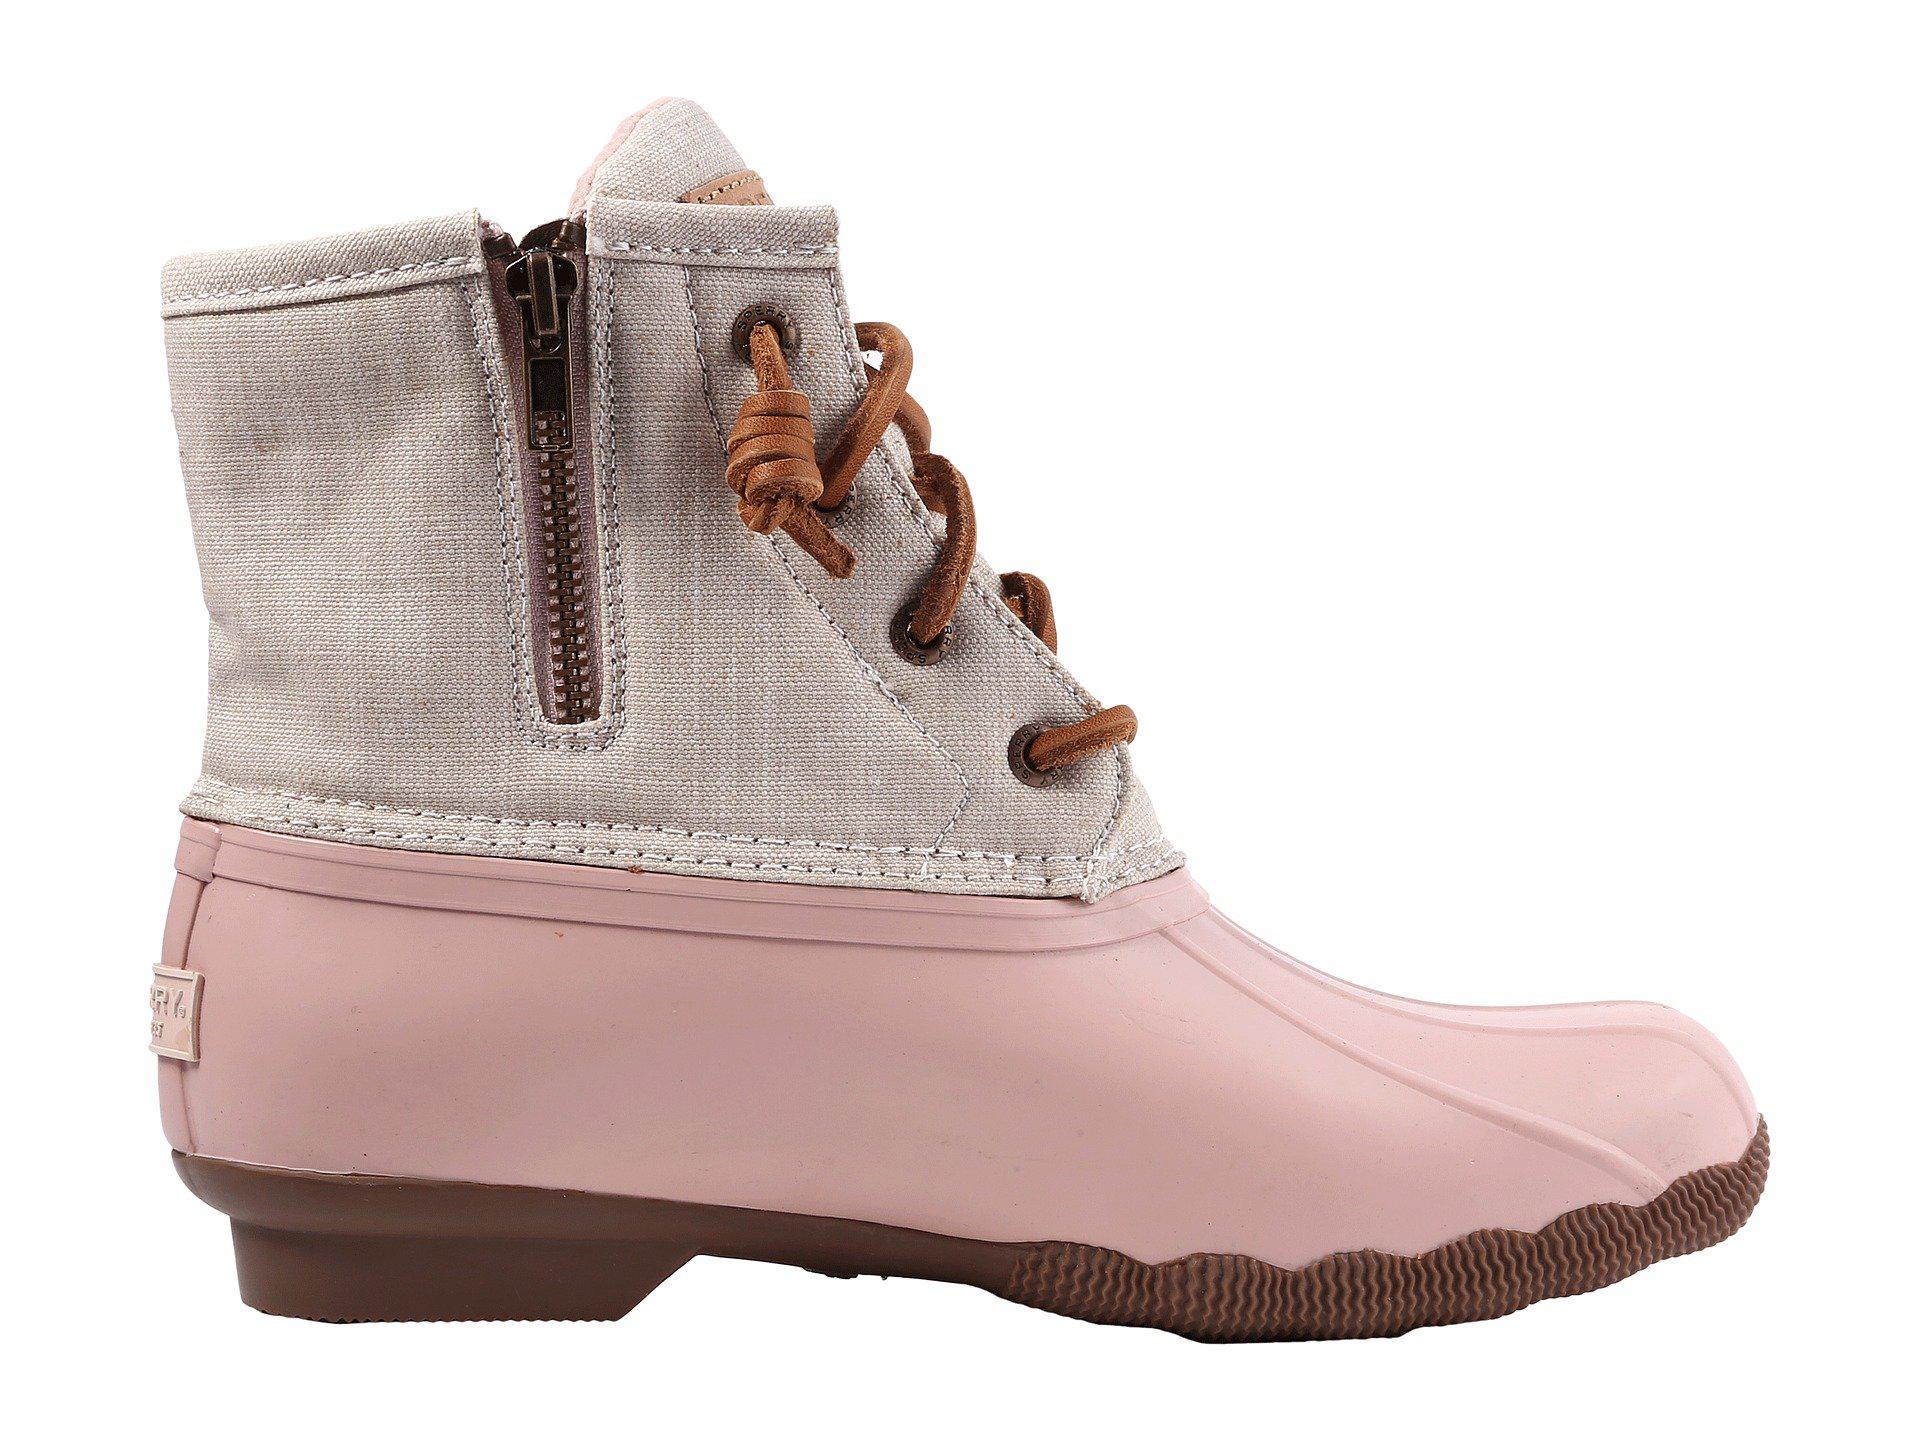 sperry rose oat duck boots